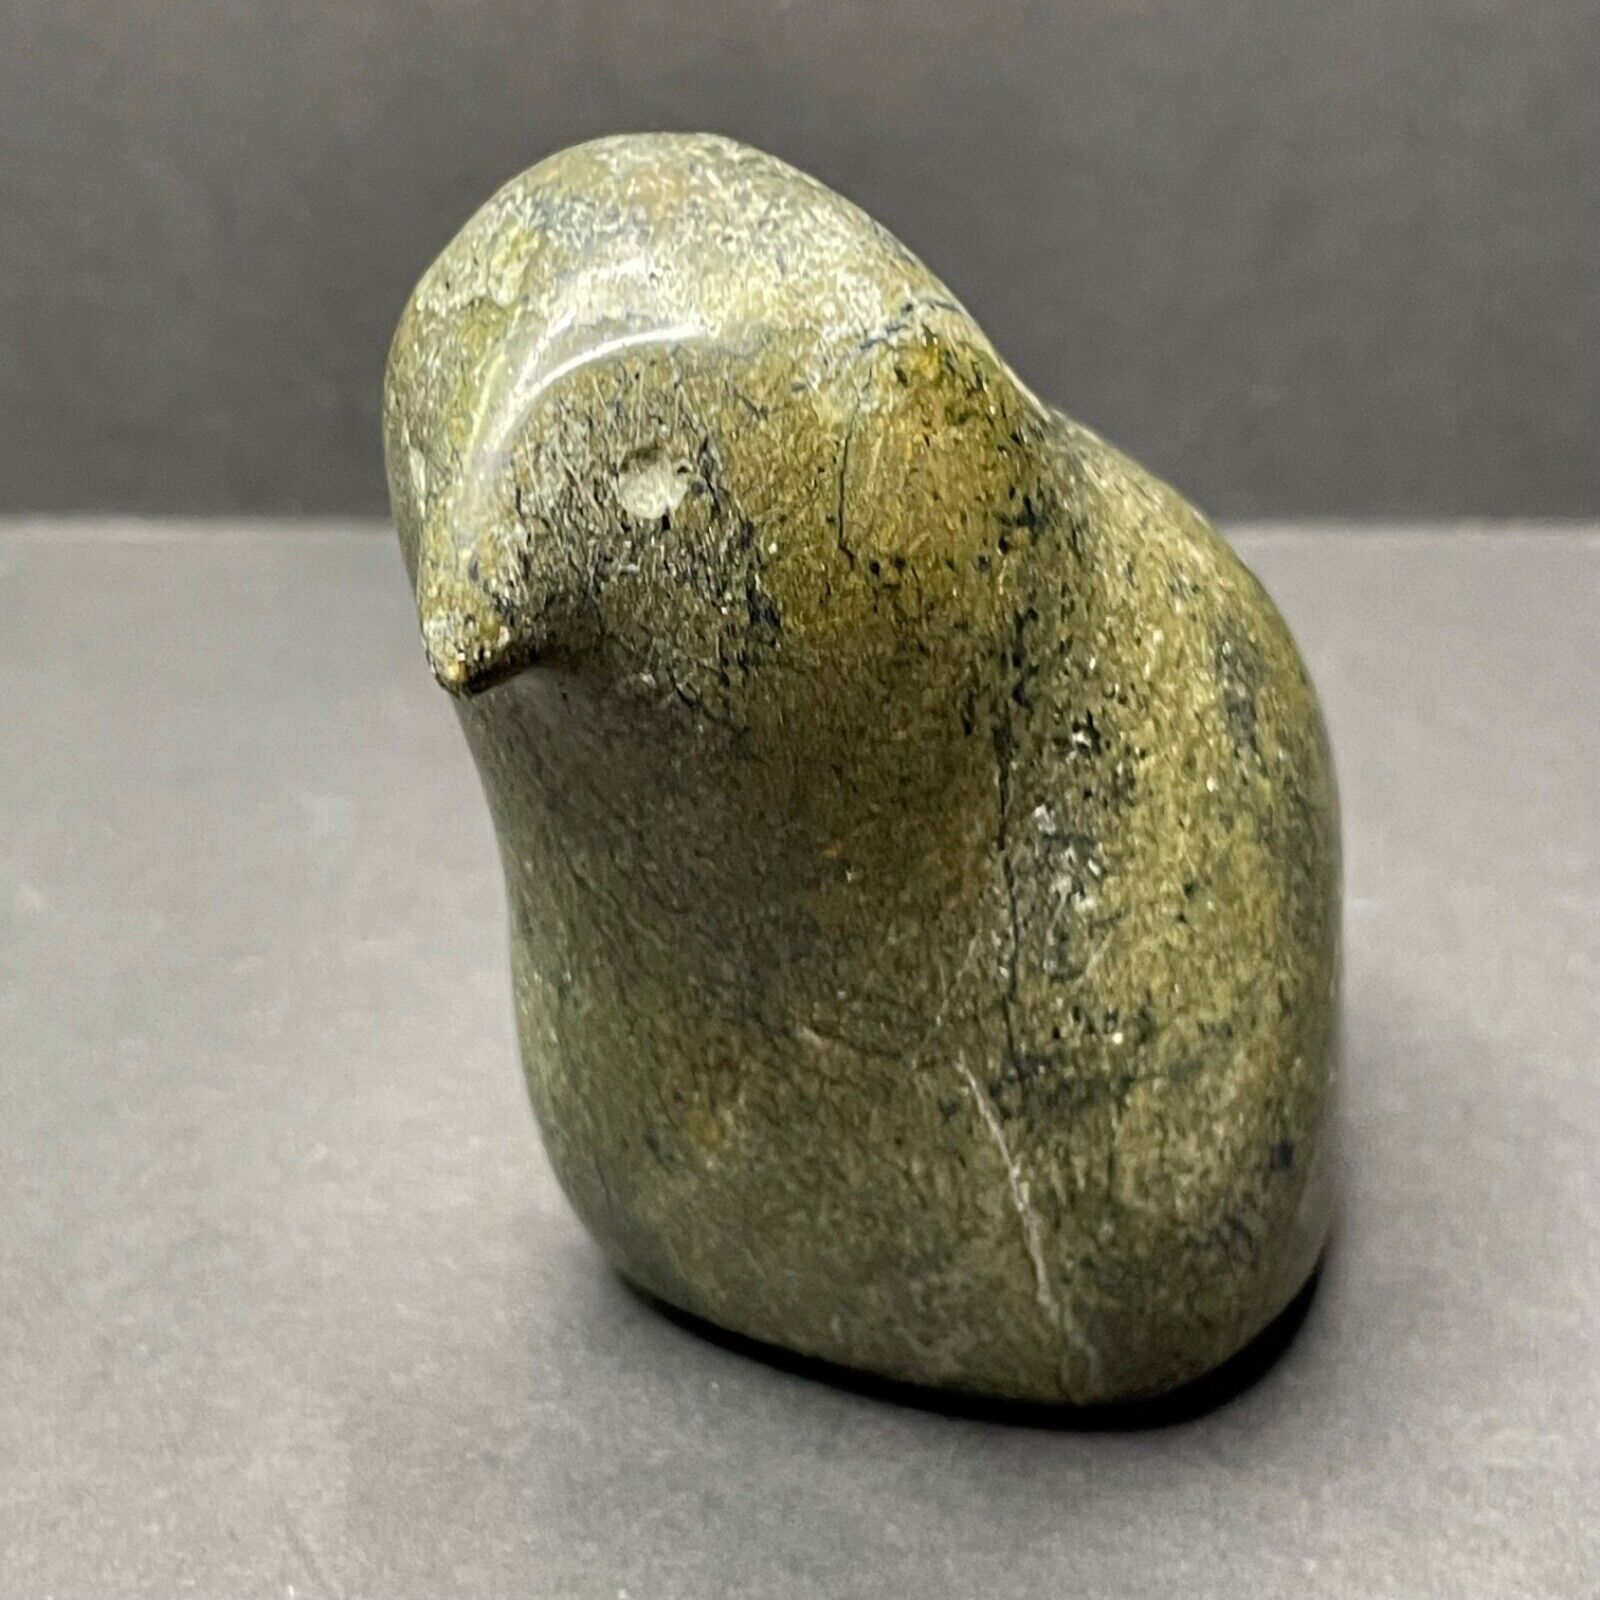 Native Inuit Carved GENUINE Soapstone Owl By Aipilie Qumaluk E9-1975 Carving